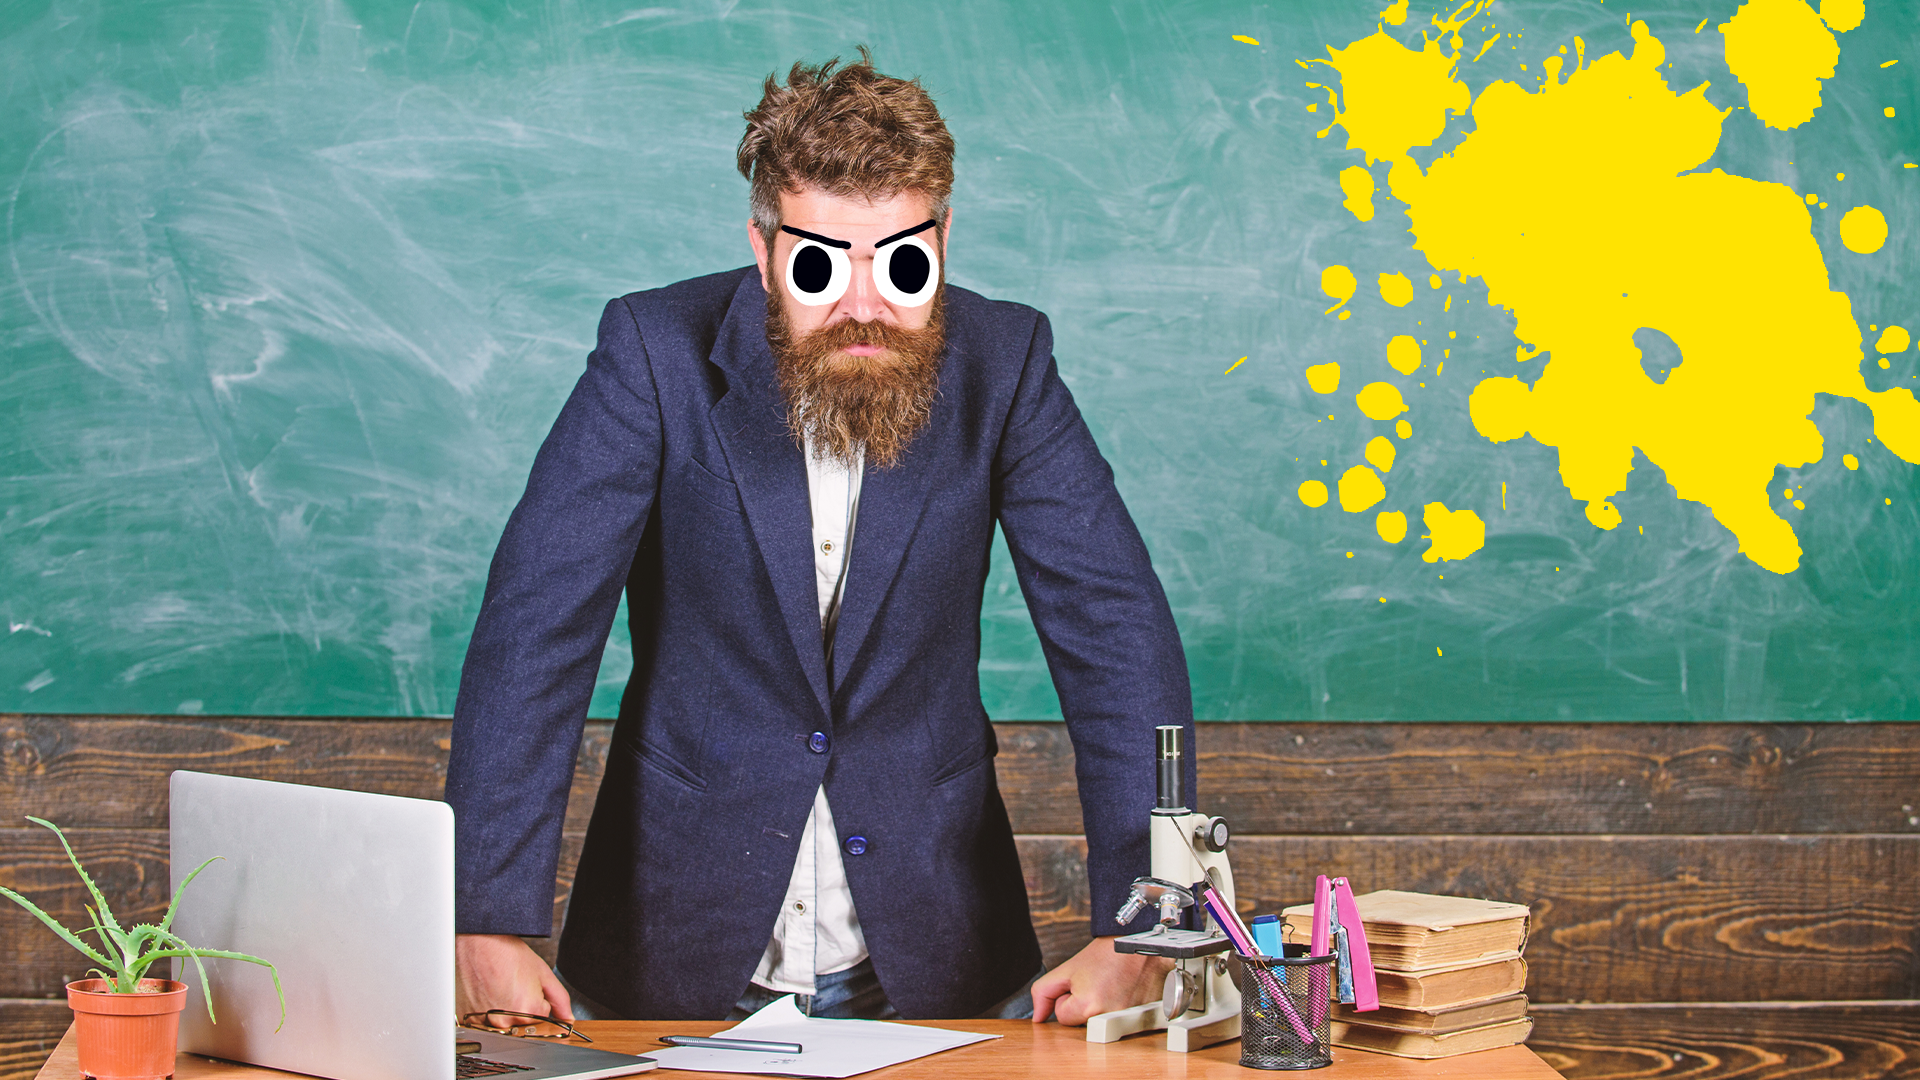 Angry looking teacher in front of blackboard with yellow splats